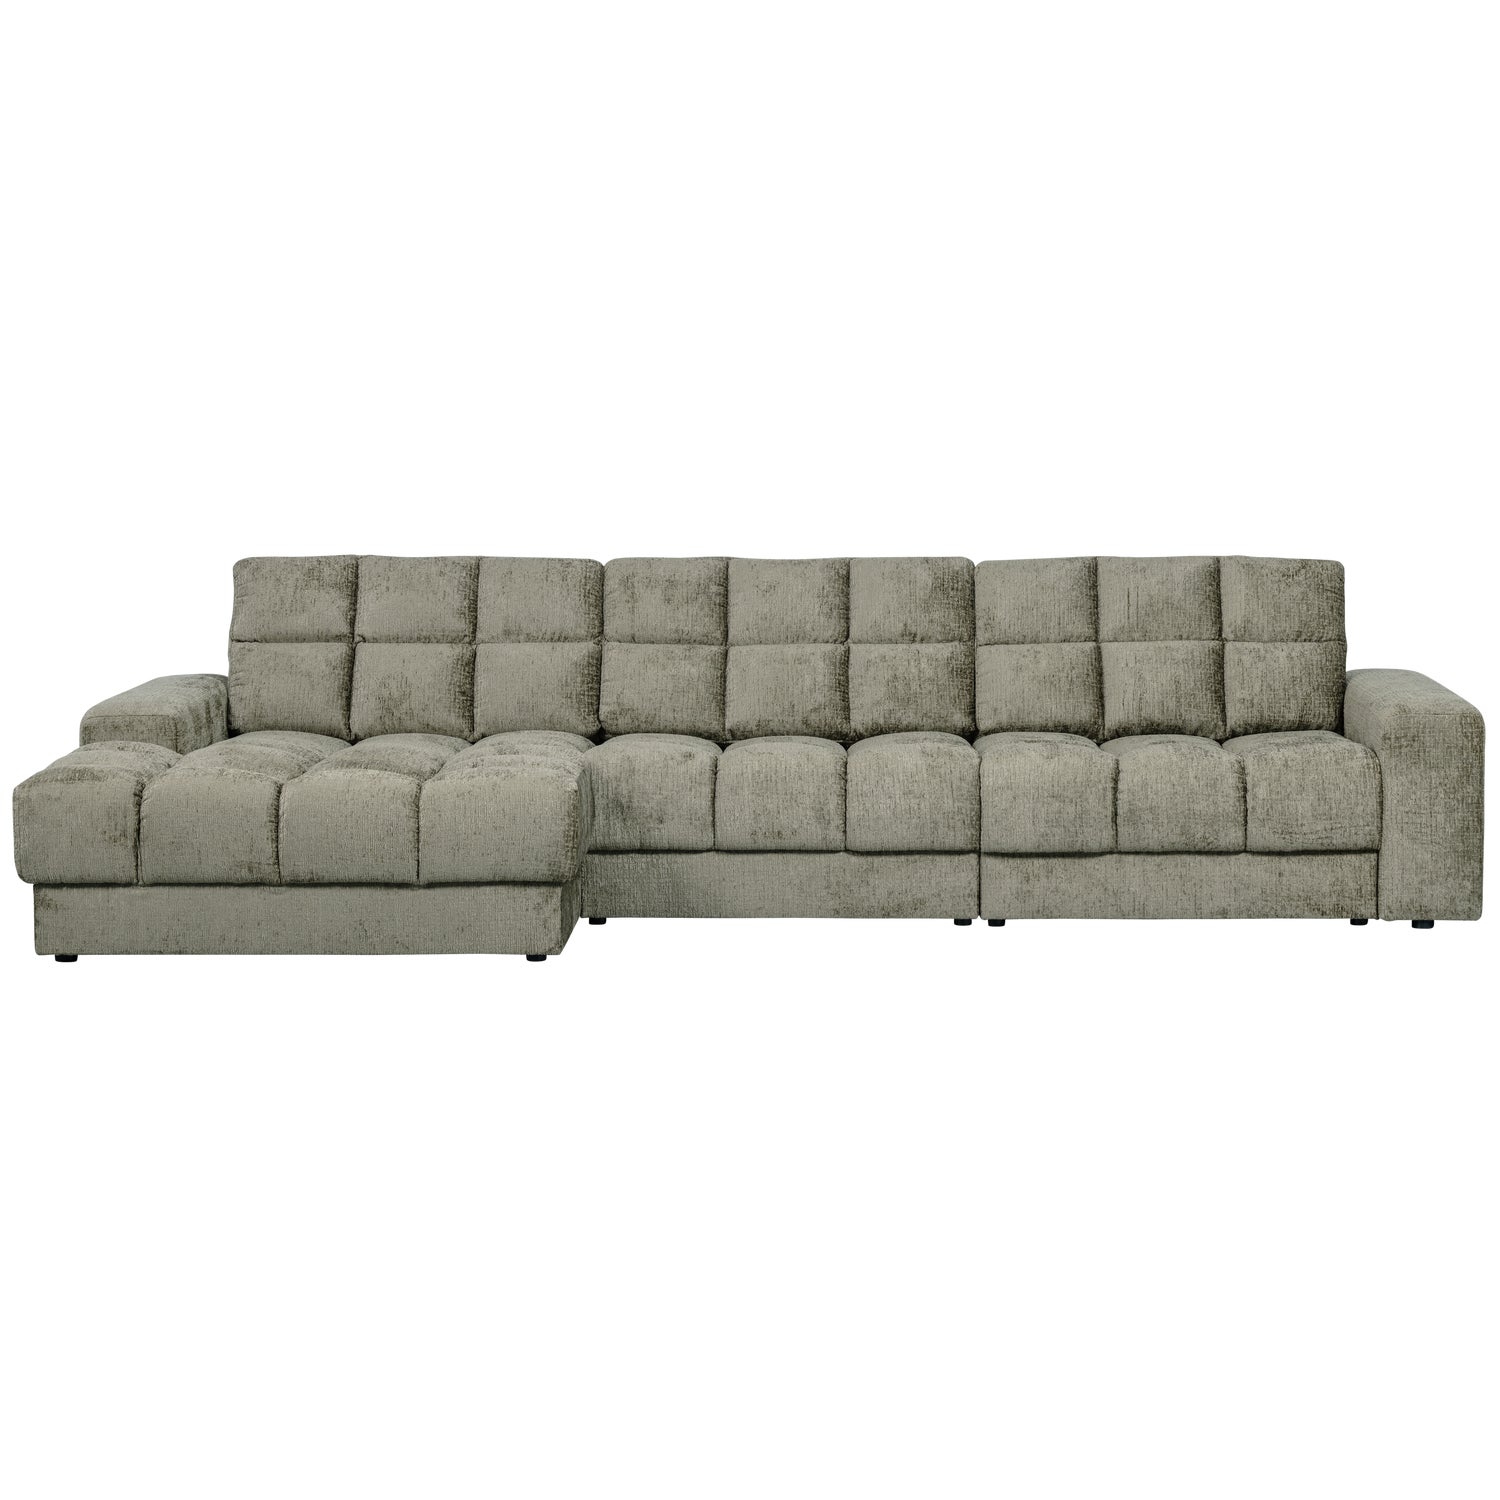 379012-FR-01_VS_WE_Second_date_chaise_longue_links_structure_velvet_frost.png?auto=webp&format=png&width=1500&height=1500